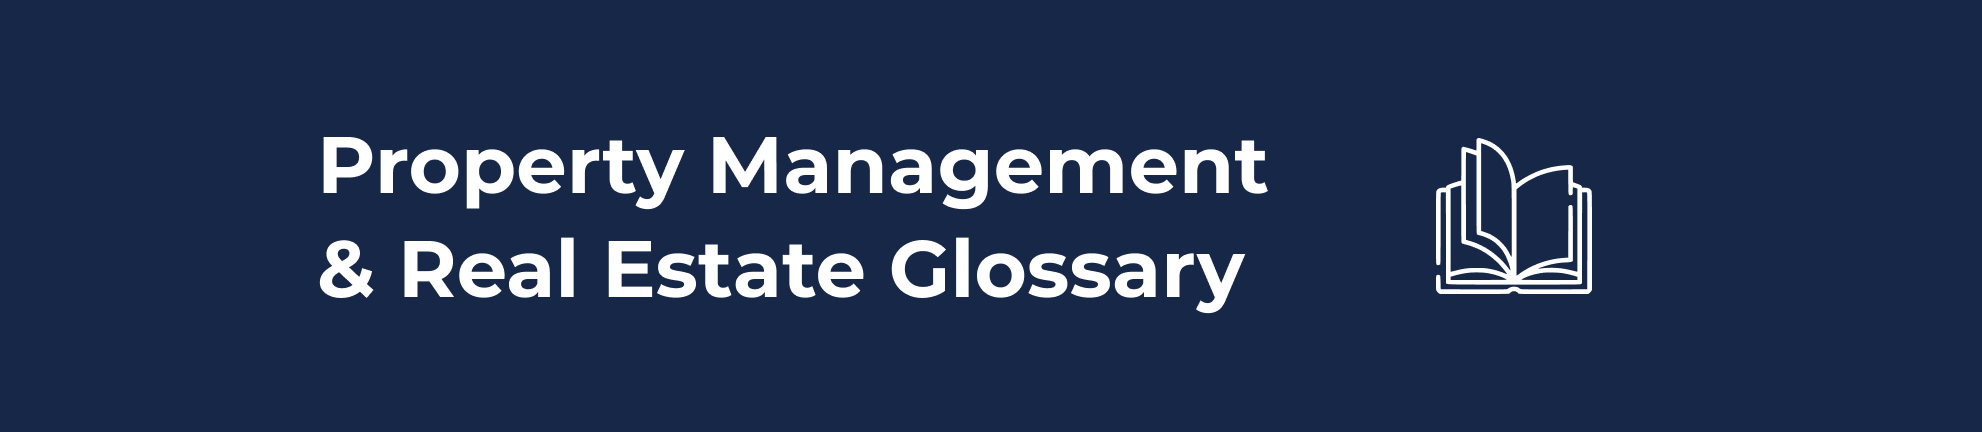 Property Management & Real Estate Glossary